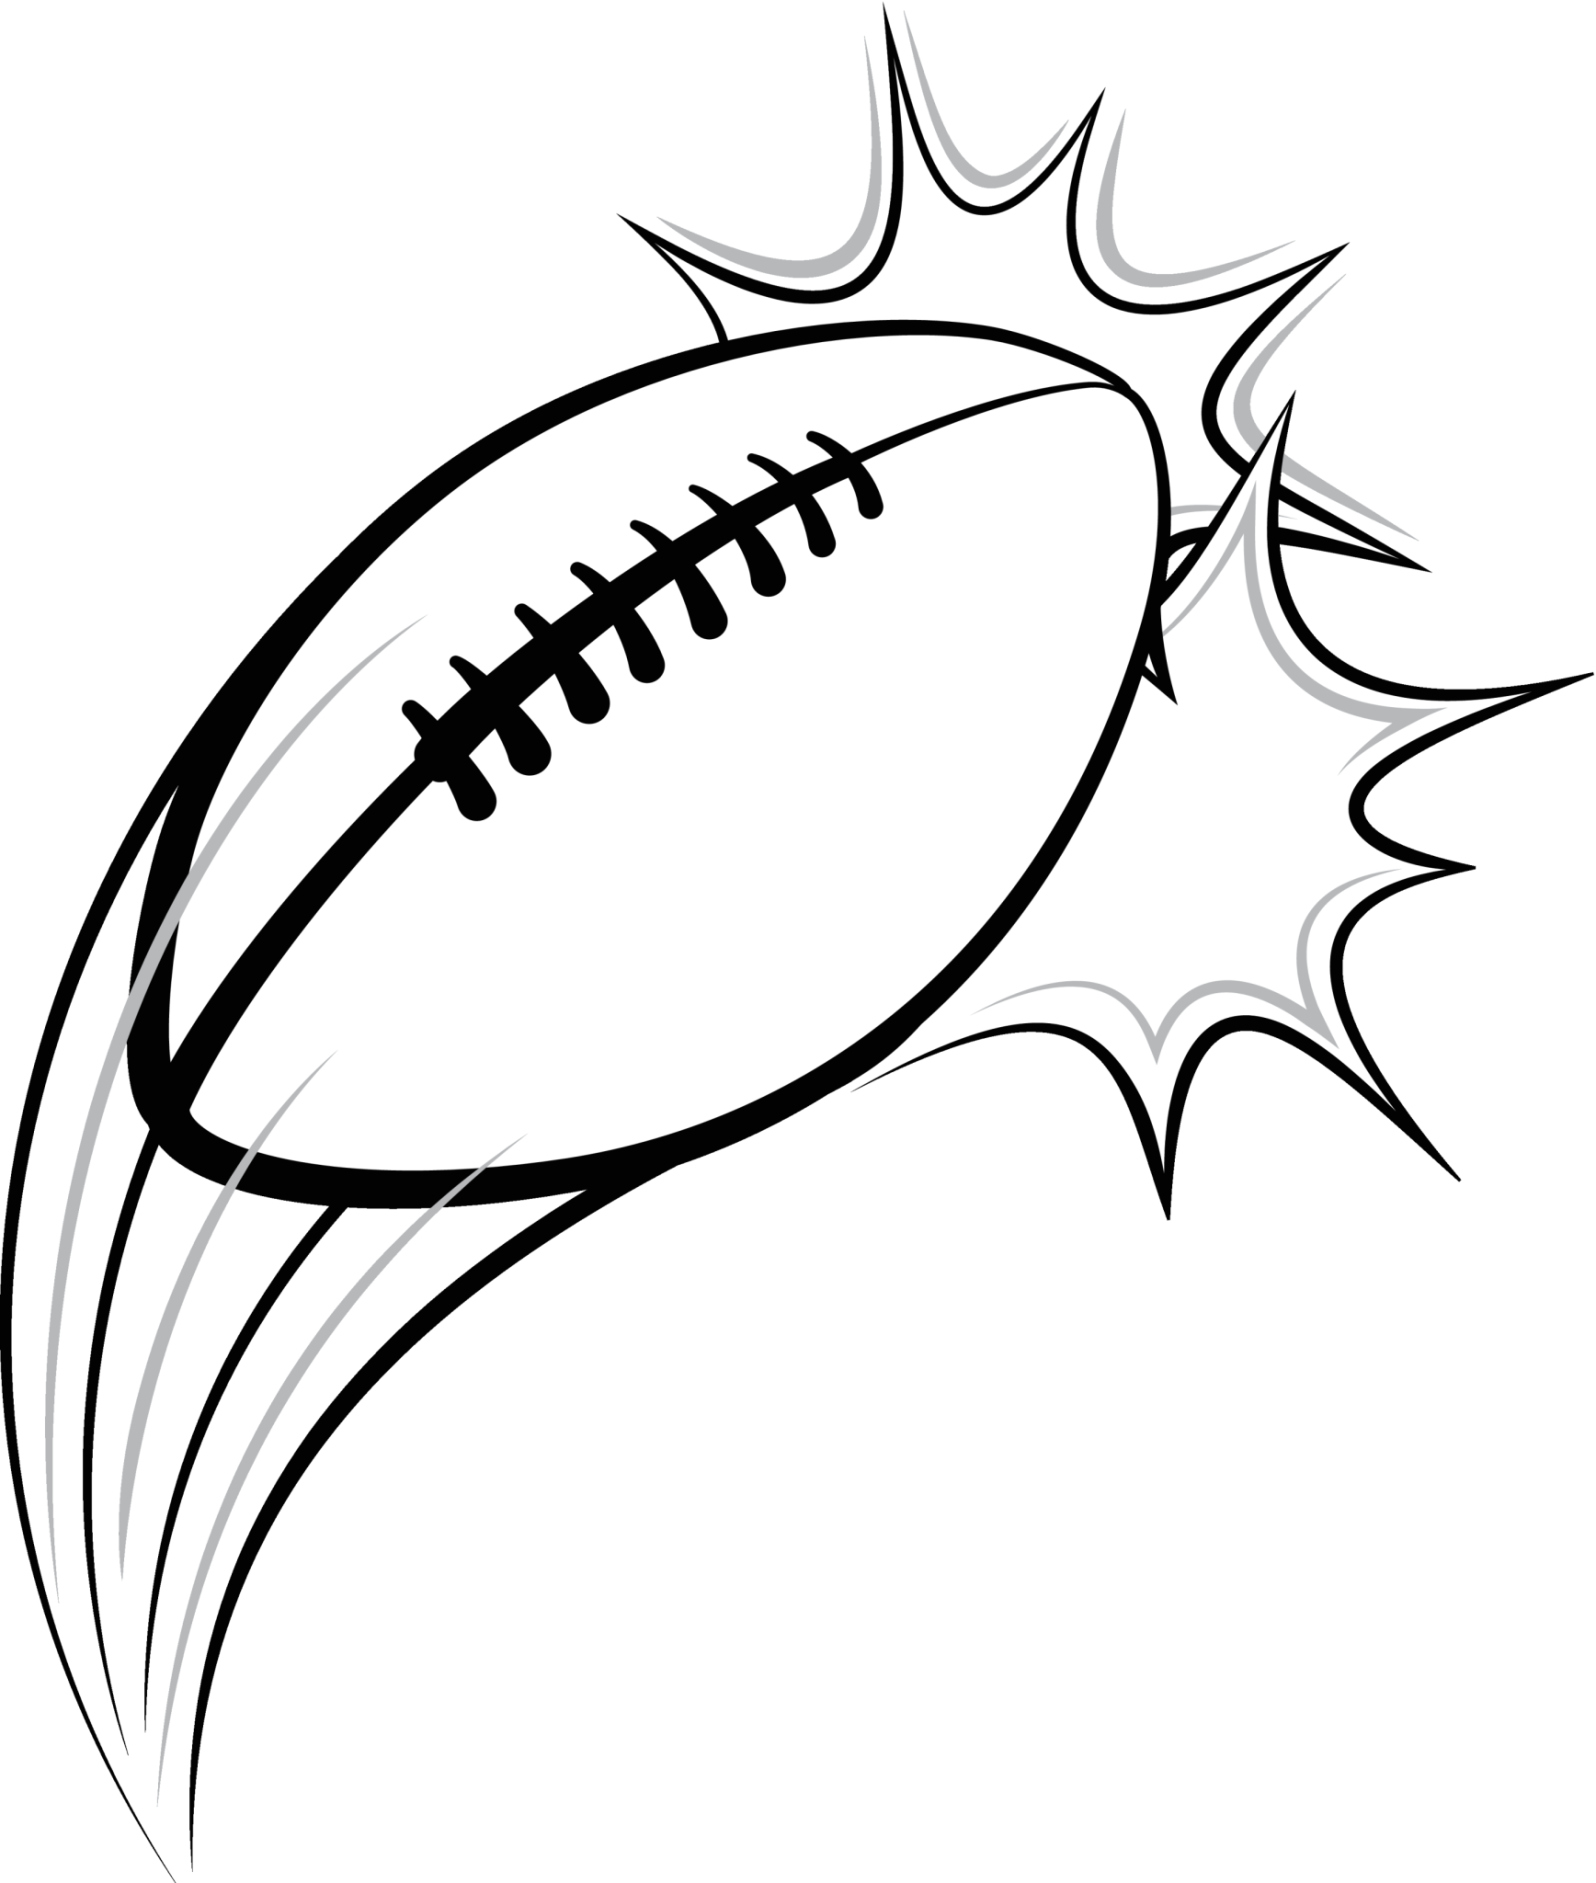 Football Player Coloring Page | Easy Drawing Guides